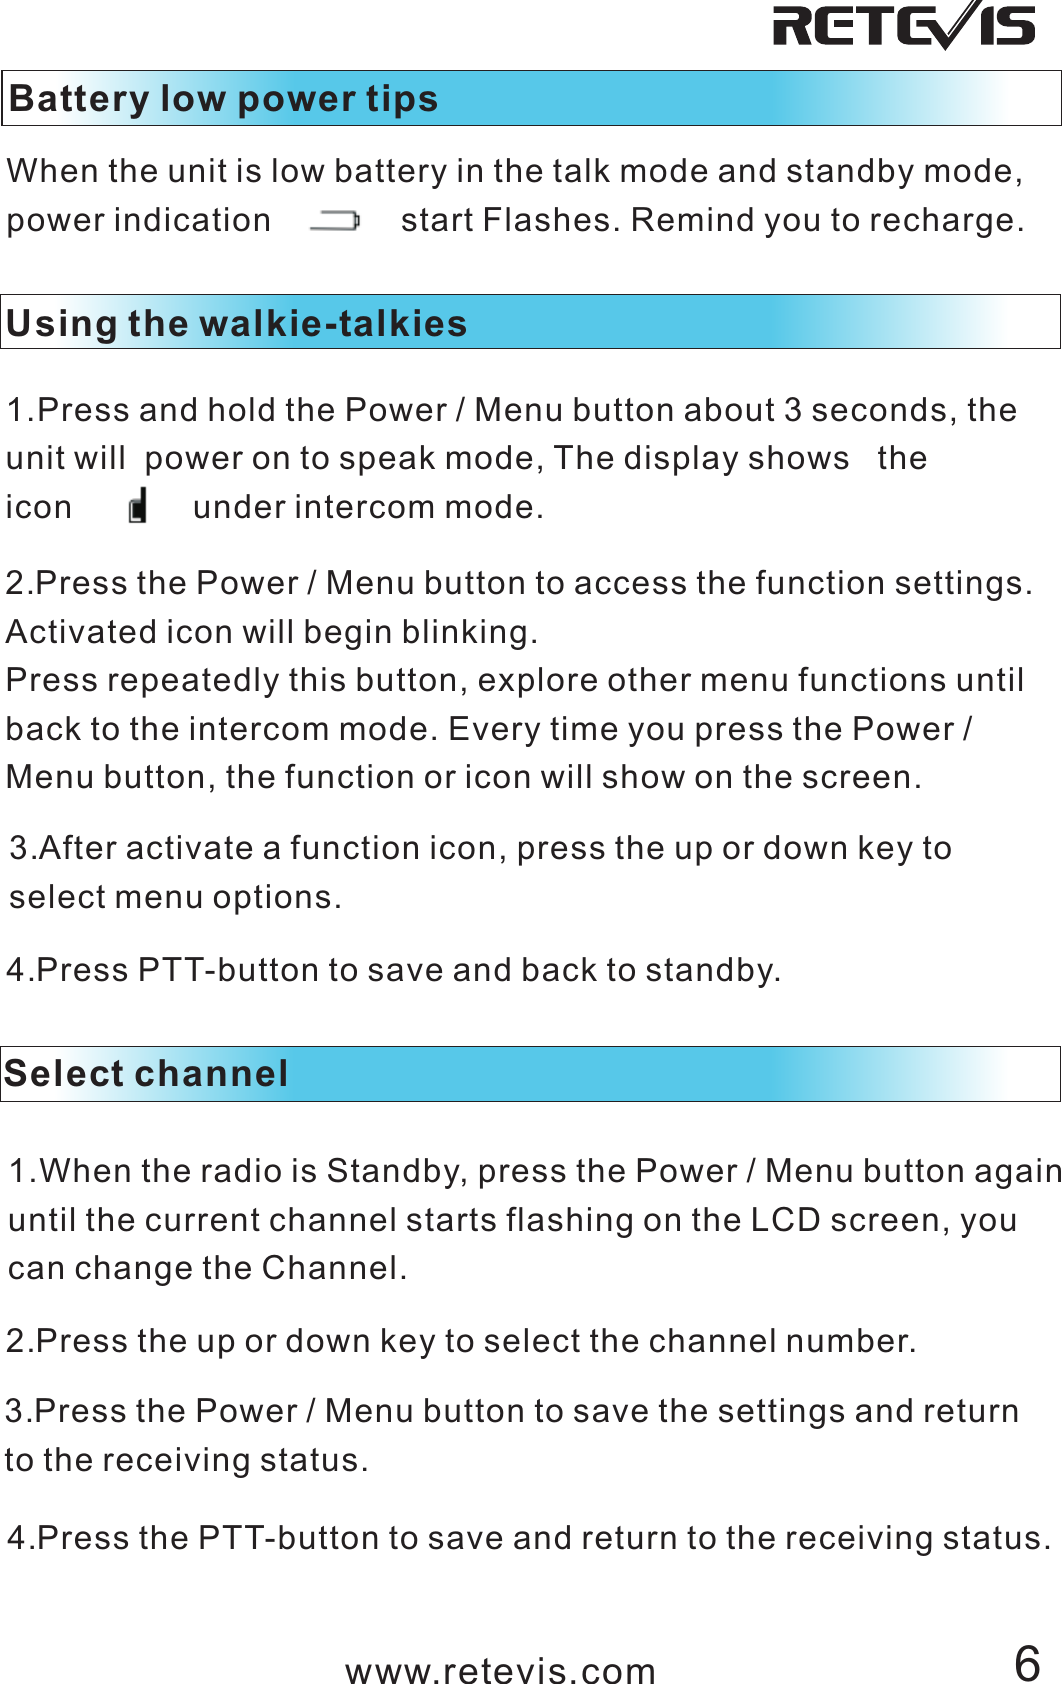 Battery low power tipsWhen the unit is low battery in the talk mode and standby mode, power indication              start Flashes. Remind you to recharge. Using the walkie-talkies 1.Press and hold the Power / Menu button about 3 seconds, the unit will  power on to speak mode, The display shows   the icon             under intercom mode.2.Press the Power / Menu button to access the function settings.Activated icon will begin blinking.Press repeatedly this button, explore other menu functions until back to the intercom mode. Every time you press the Power / Menu button, the function or icon will show on the screen. 3.After activate a function icon, press the up or down key to select menu options.4.Press PTT-button to save and back to standby. Select channel1.When the radio is Standby, press the Power / Menu button againuntil the current channel starts flashing on the LCD screen, you can change the Channel.2.Press the up or down key to select the channel number.3.Press the Power / Menu button to save the settings and return to the receiving status.4.Press the PTT-button to save and return to the receiving status.www.retevis.com 6